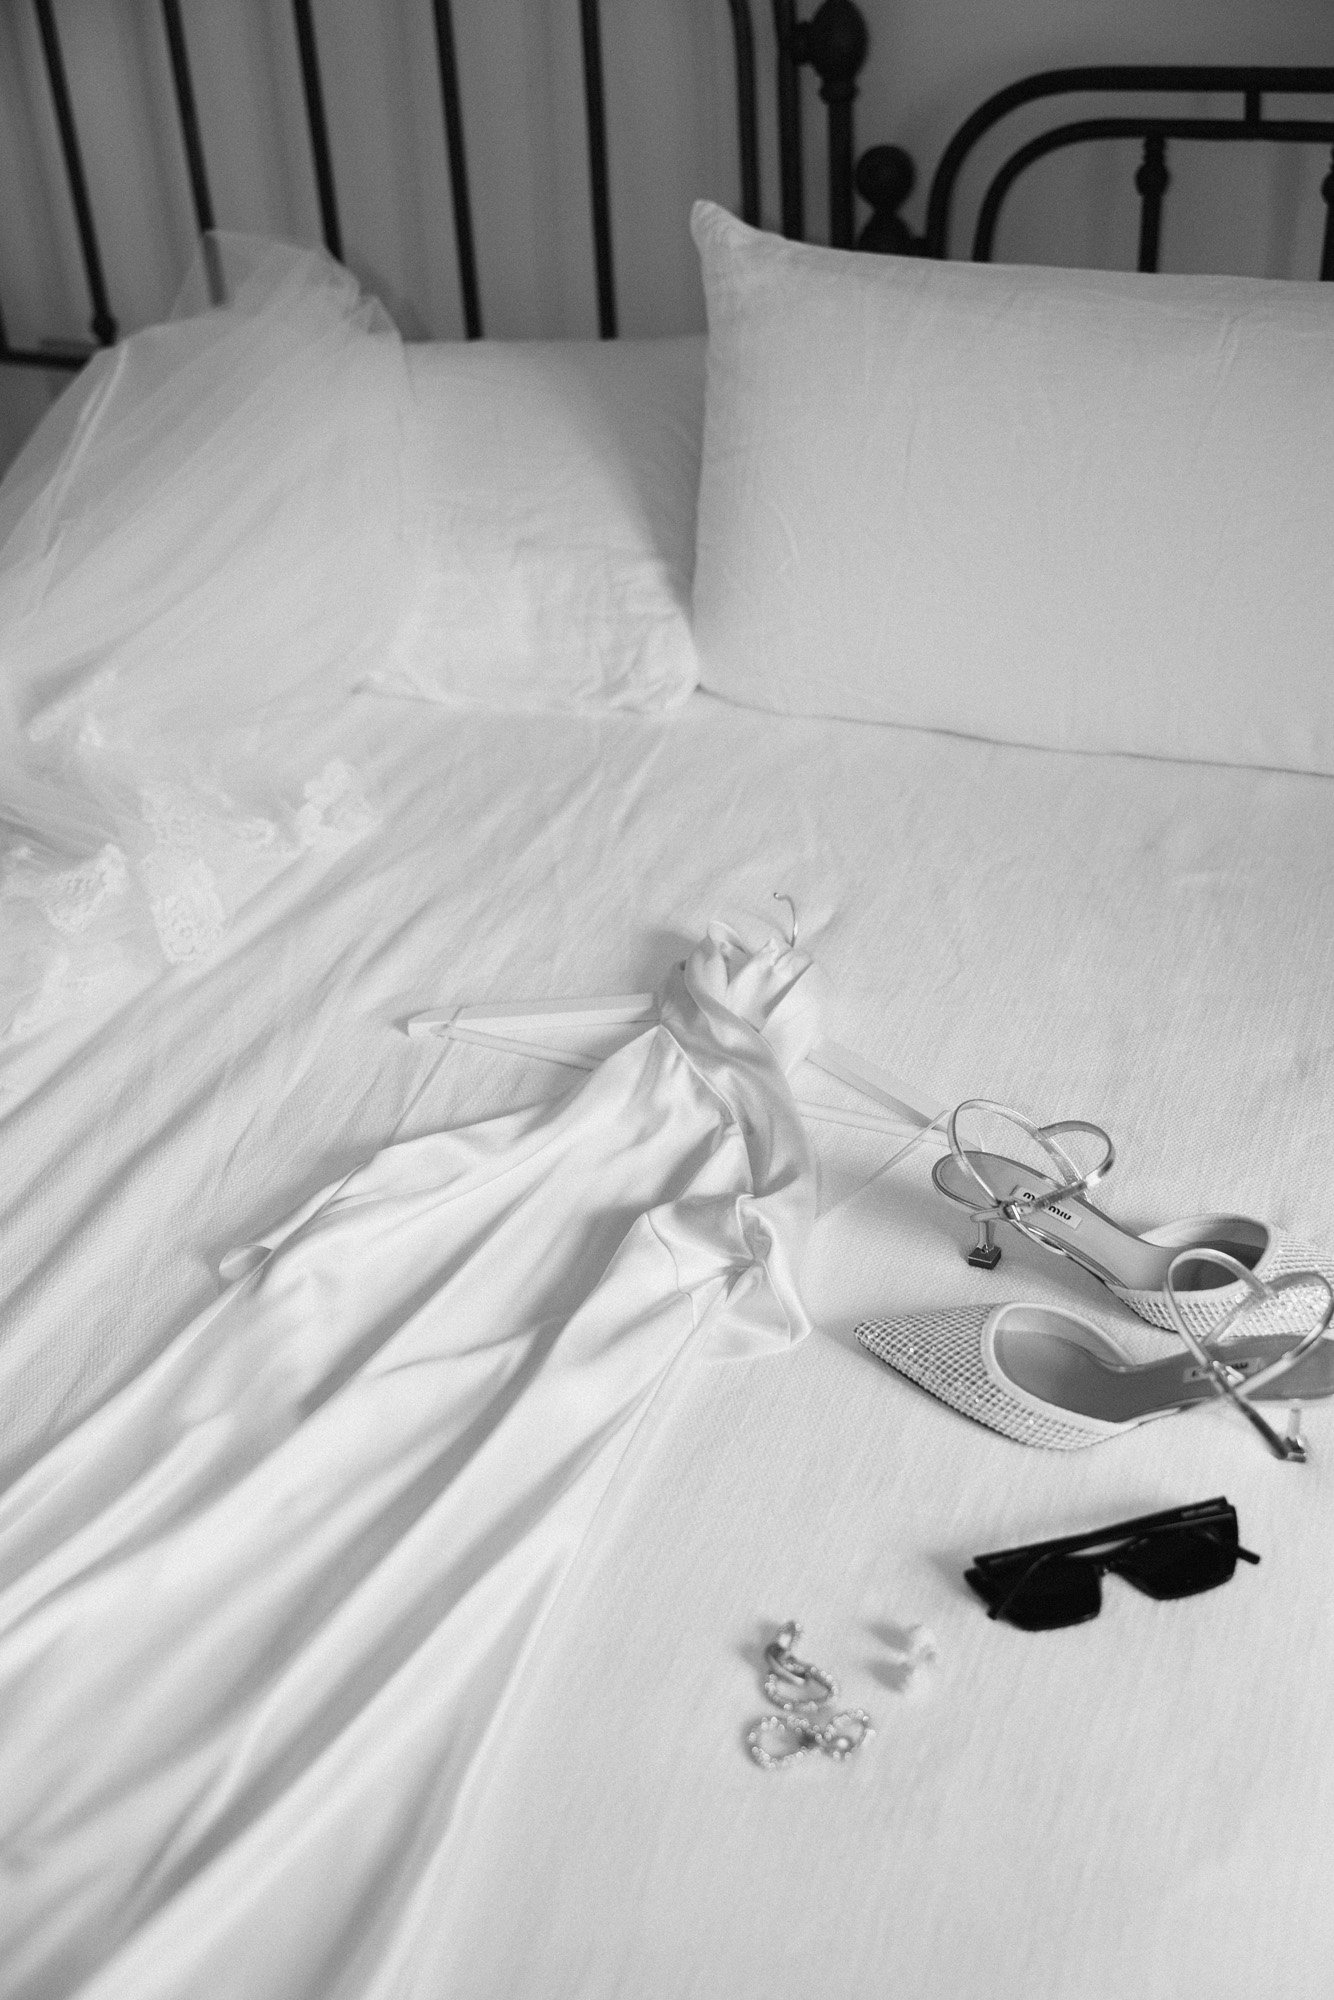  miu miu bridal heels styled with the brides gown and pearl stud earrings by abellie in the bridal suite in italy. 